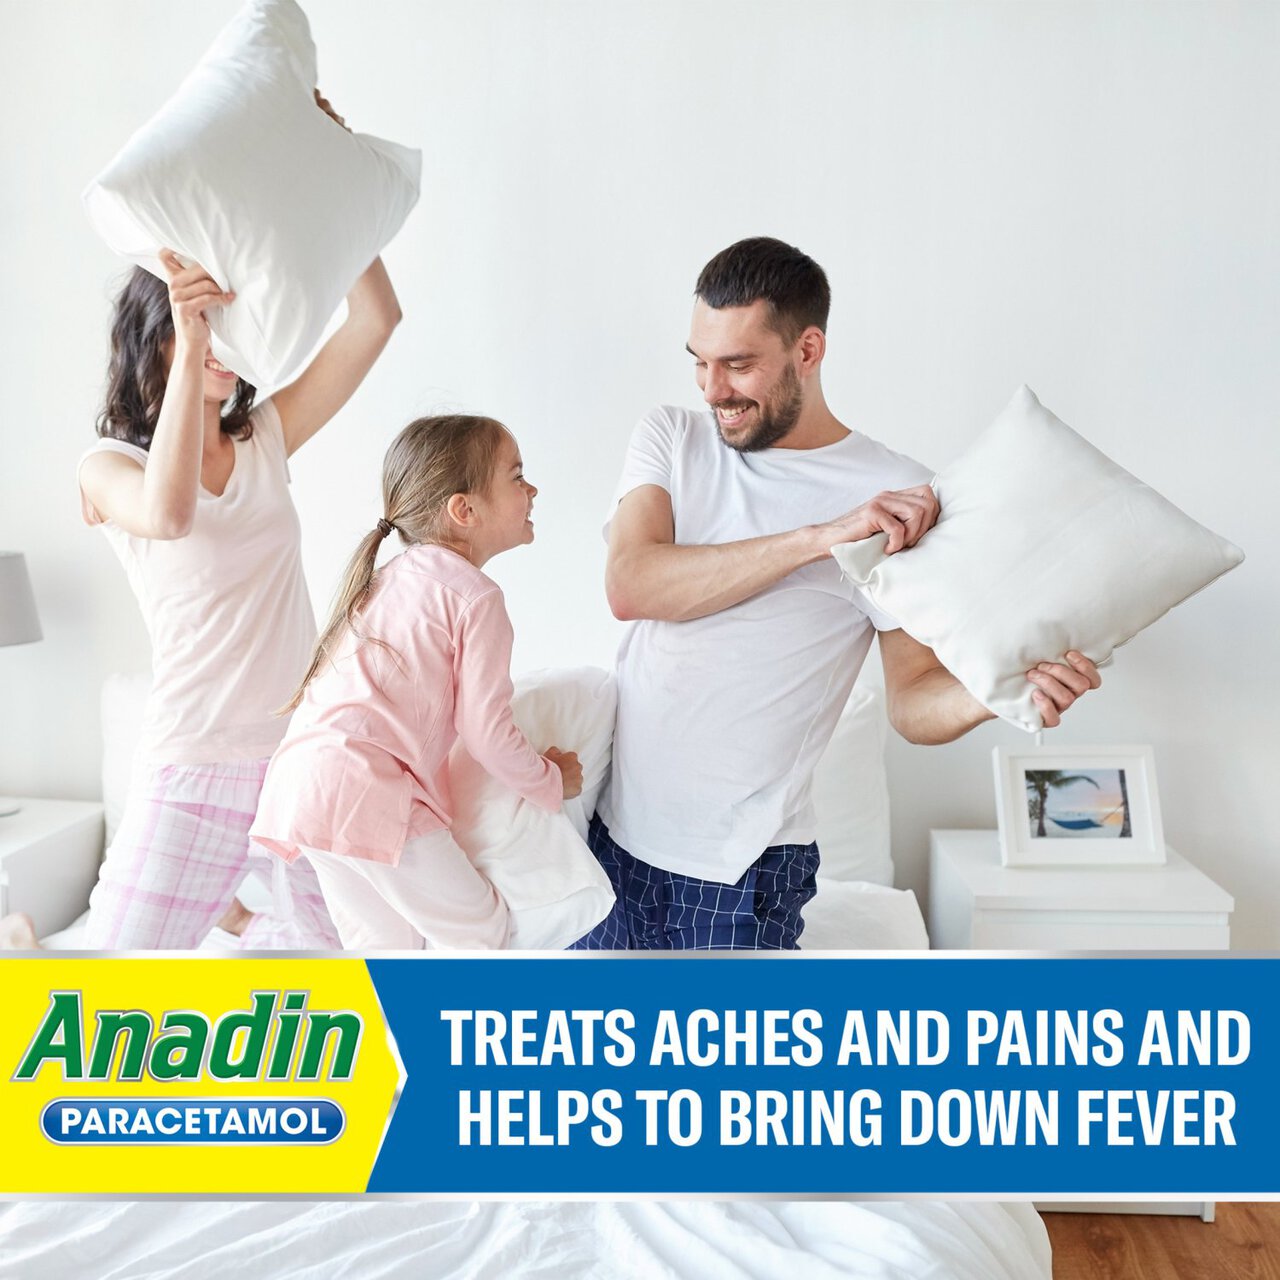 Anadin Paracetamol Pain Relief for Headaches Cold & Flu Tablets 16 16 per pack